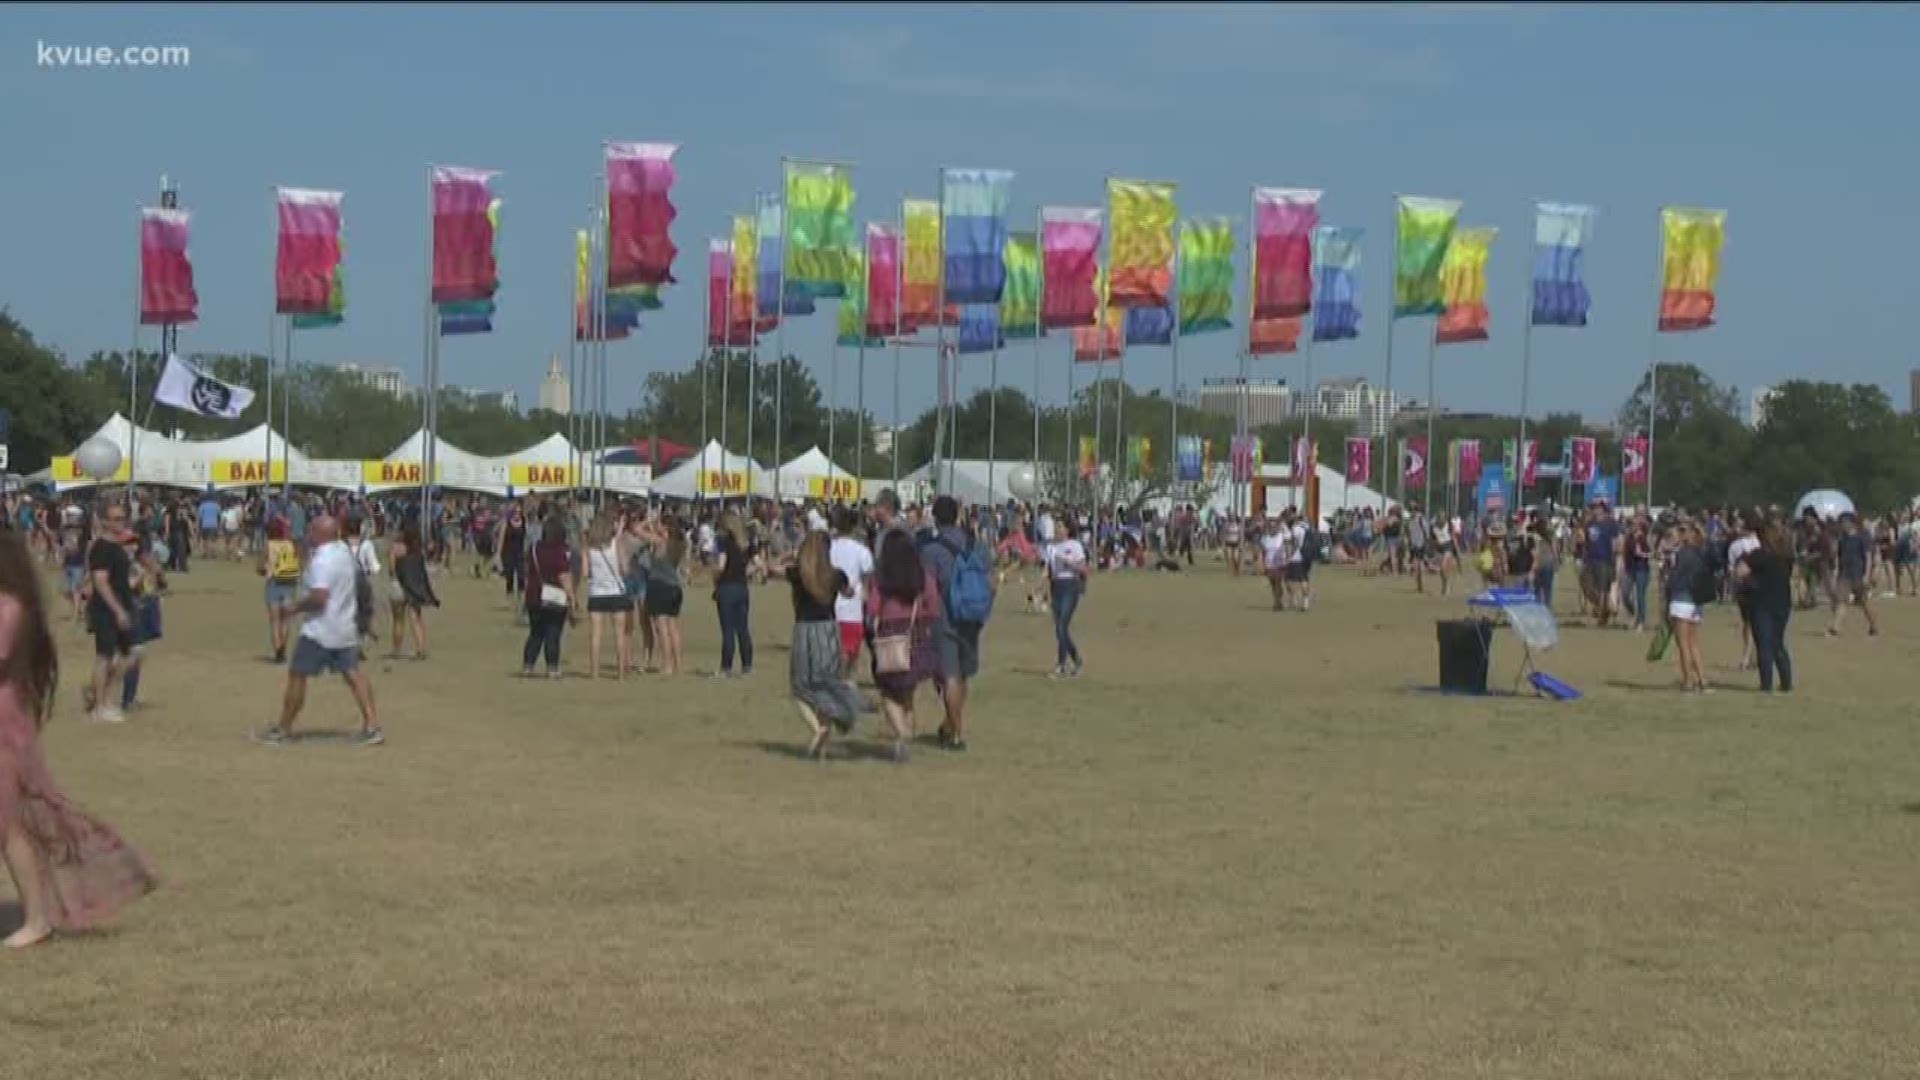 Between football and music festivals, fall is an exciting time in Central Texans. But that means it's also an exciting time for scammers looking to steal money from people buying tickets. Here at KVUE with tips on avoiding ticket scams this fall is Carlos Villalobos with the Better Business Bureau.